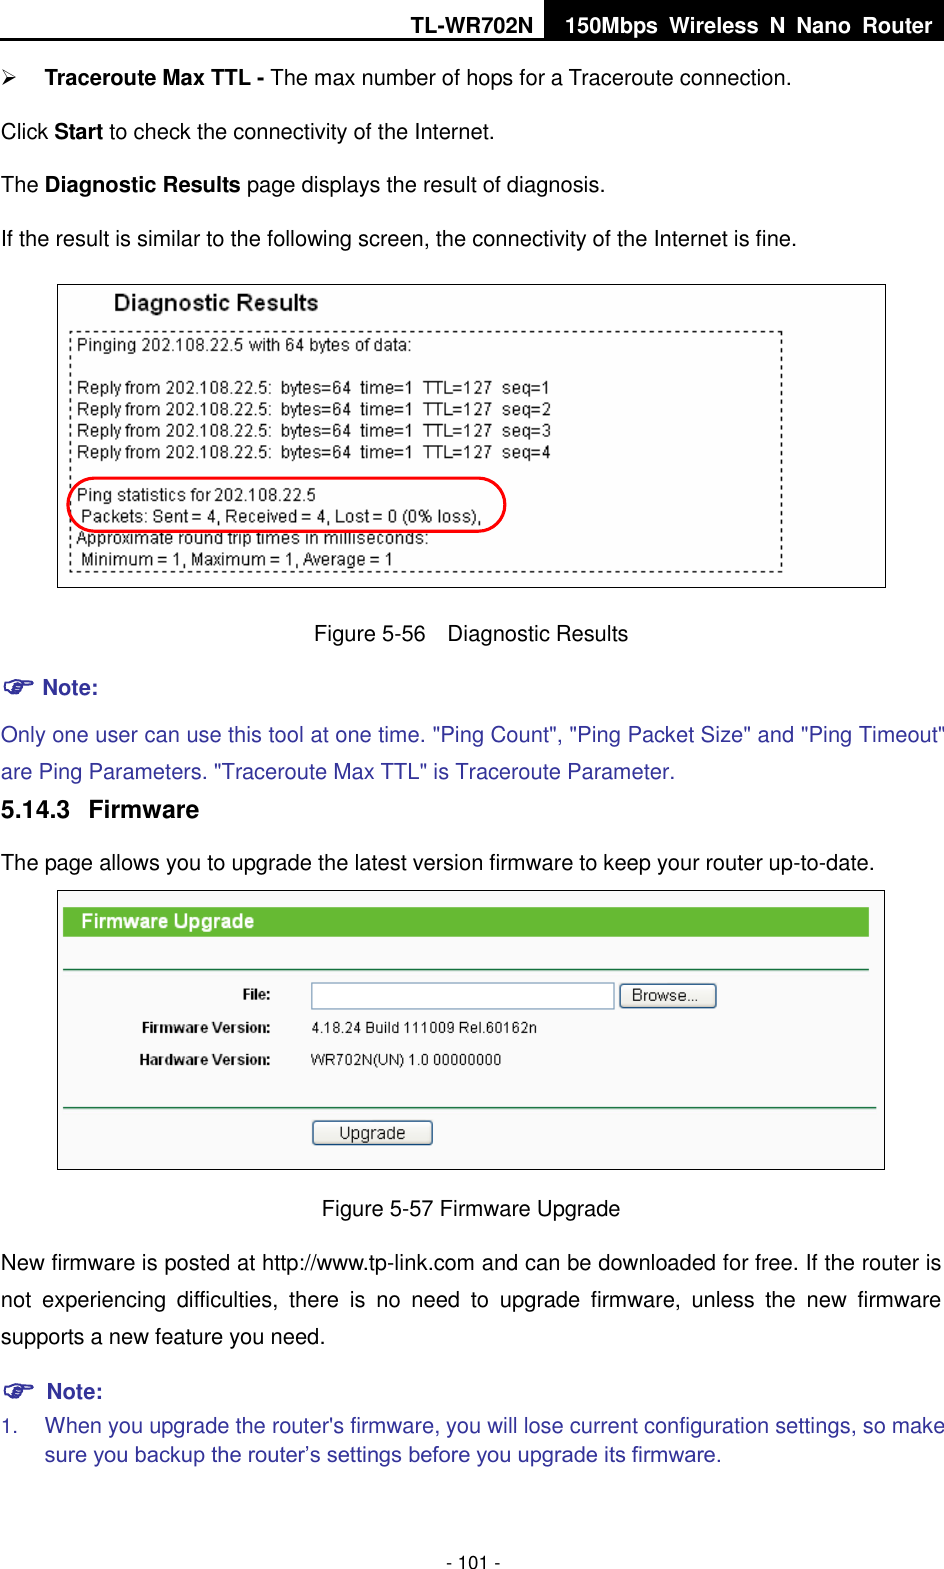 TL-WR702N 150Mbps  Wireless  N  Nano  Router  - 101 -  Traceroute Max TTL - The max number of hops for a Traceroute connection. Click Start to check the connectivity of the Internet.   The Diagnostic Results page displays the result of diagnosis. If the result is similar to the following screen, the connectivity of the Internet is fine.  Figure 5-56  Diagnostic Results  Note: Only one user can use this tool at one time. &quot;Ping Count&quot;, &quot;Ping Packet Size&quot; and &quot;Ping Timeout&quot; are Ping Parameters. &quot;Traceroute Max TTL&quot; is Traceroute Parameter.   5.14.3  Firmware The page allows you to upgrade the latest version firmware to keep your router up-to-date.  Figure 5-57 Firmware Upgrade New firmware is posted at http://www.tp-link.com and can be downloaded for free. If the router is not  experiencing  difficulties,  there  is  no  need  to  upgrade  firmware,  unless  the  new  firmware supports a new feature you need.  Note: 1. When you upgrade the router&apos;s firmware, you will lose current configuration settings, so make sure you backup the router’s settings before you upgrade its firmware.   